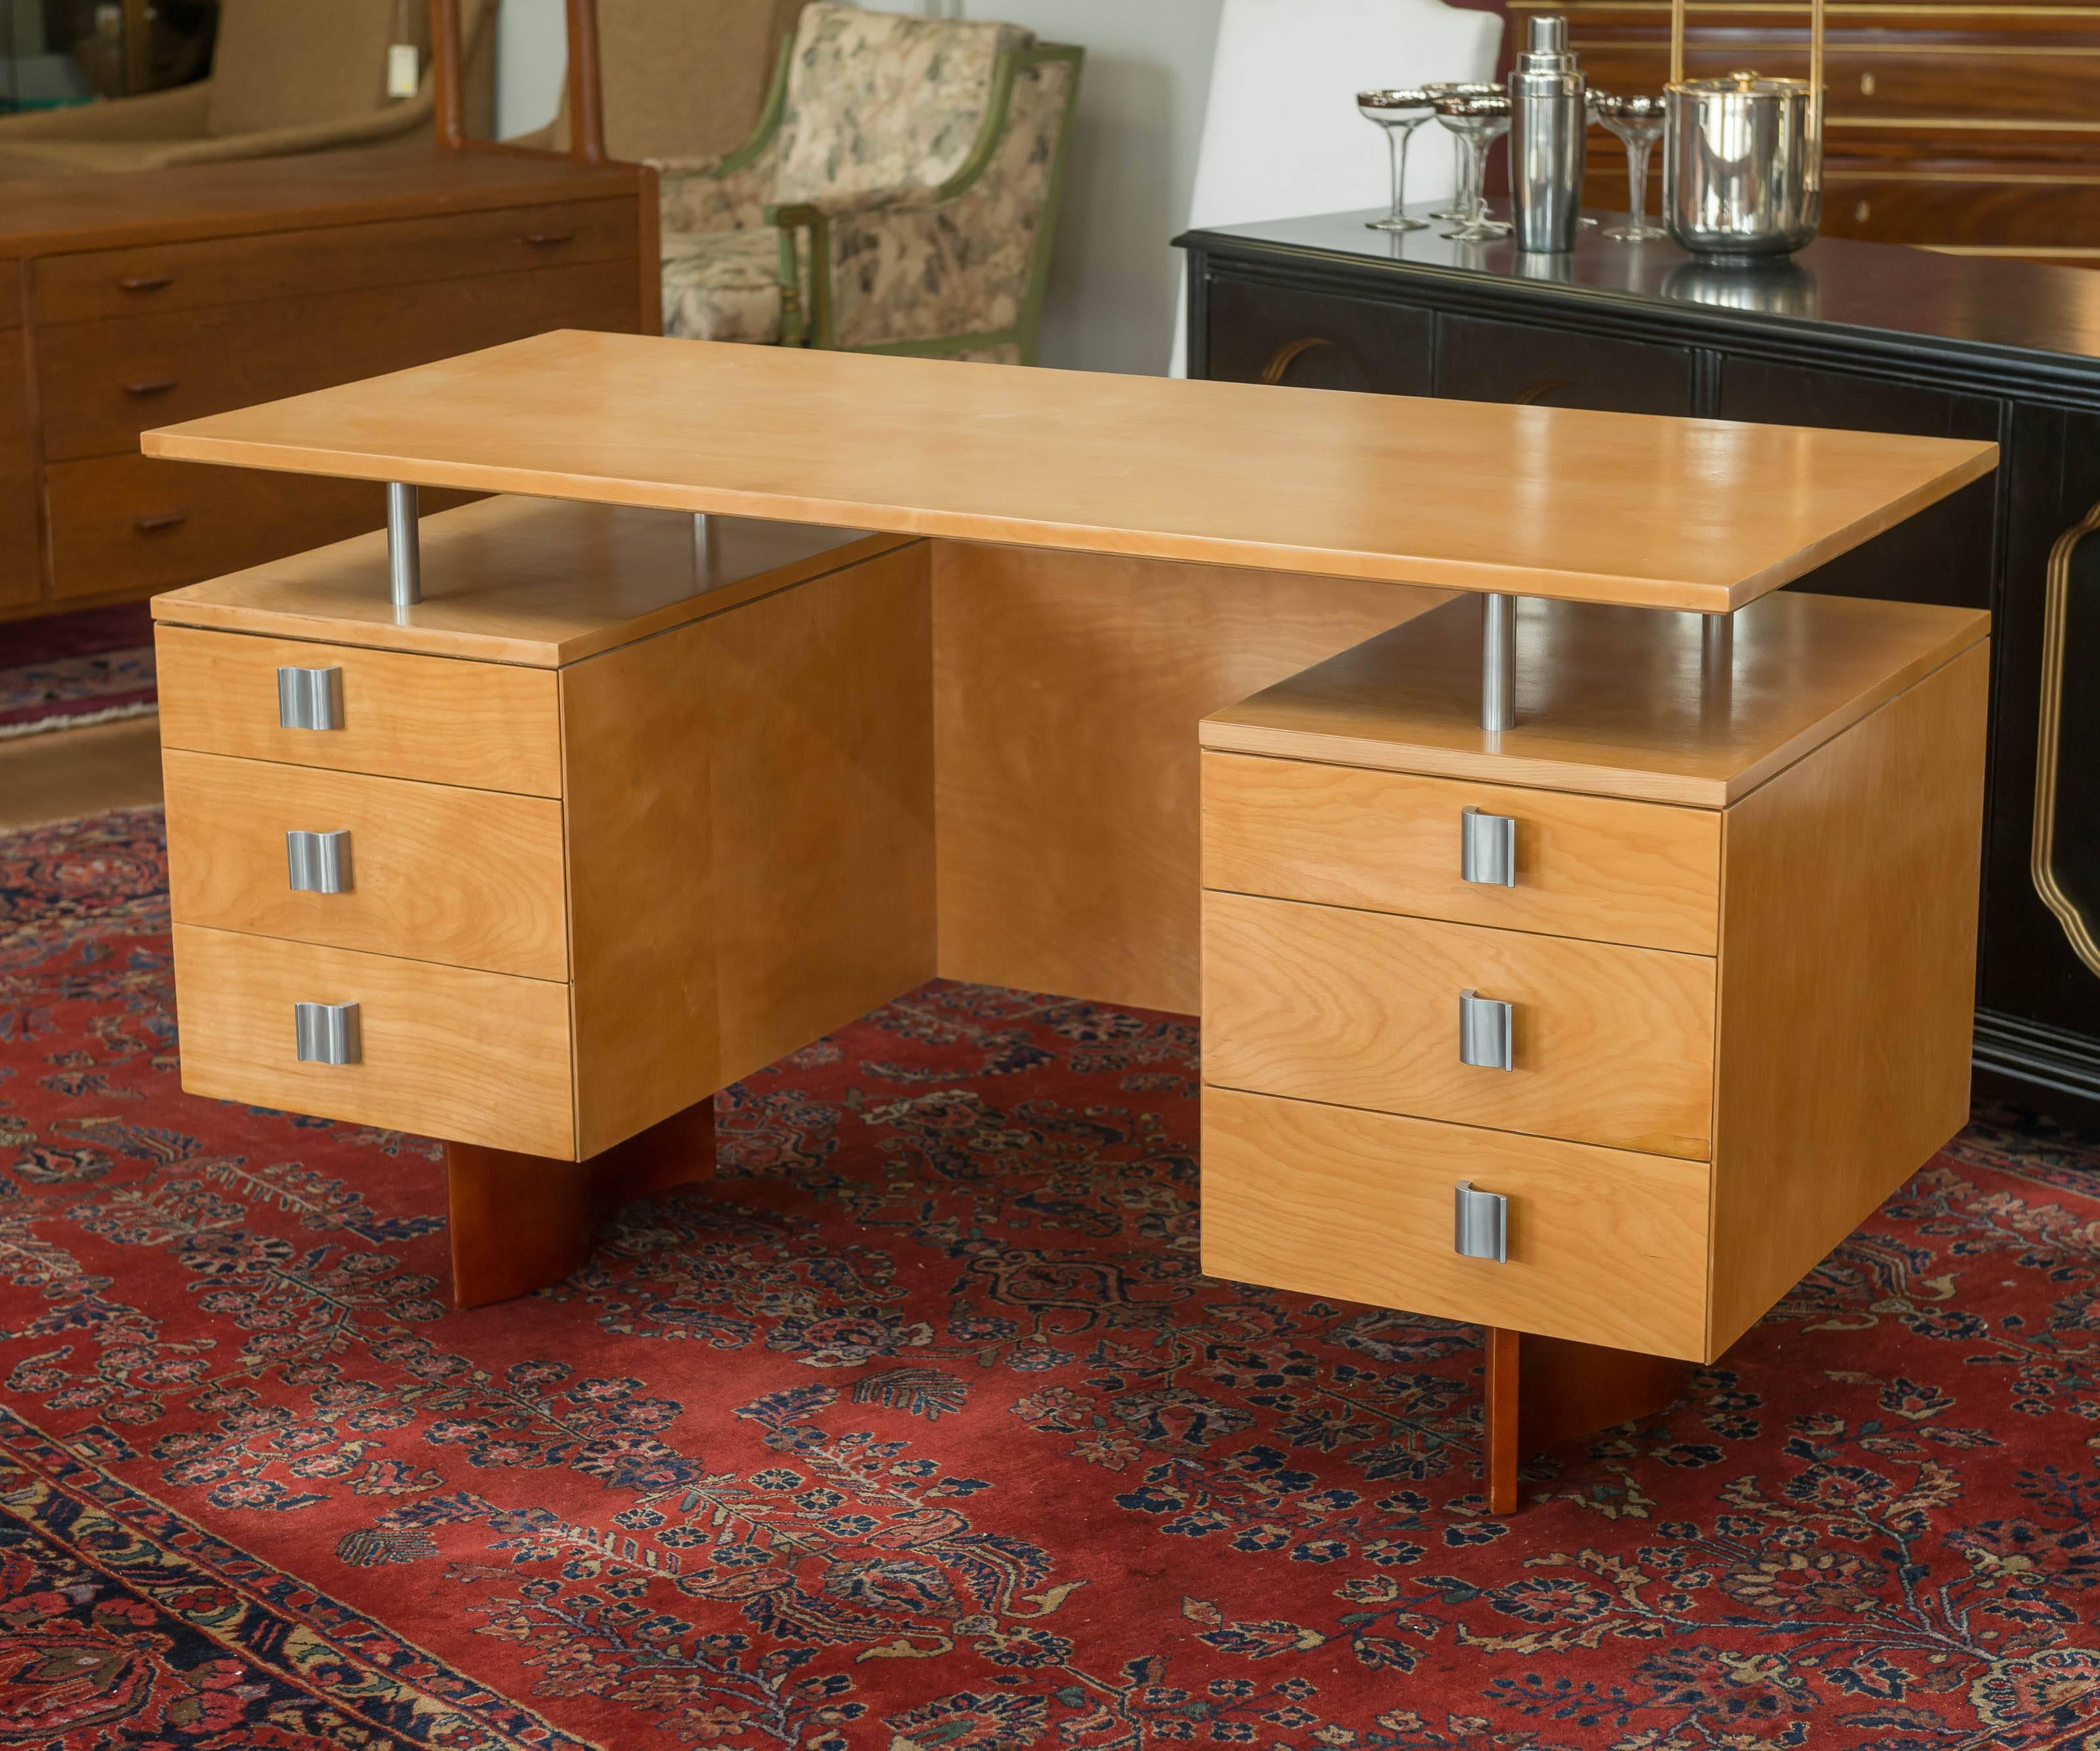 Desk designed by Eliel Saarinen for Johnson Furniture Company, circa 1940s. Birchwood construction, six brushed aluminum handles and four cylinders holding up the desk top surface.